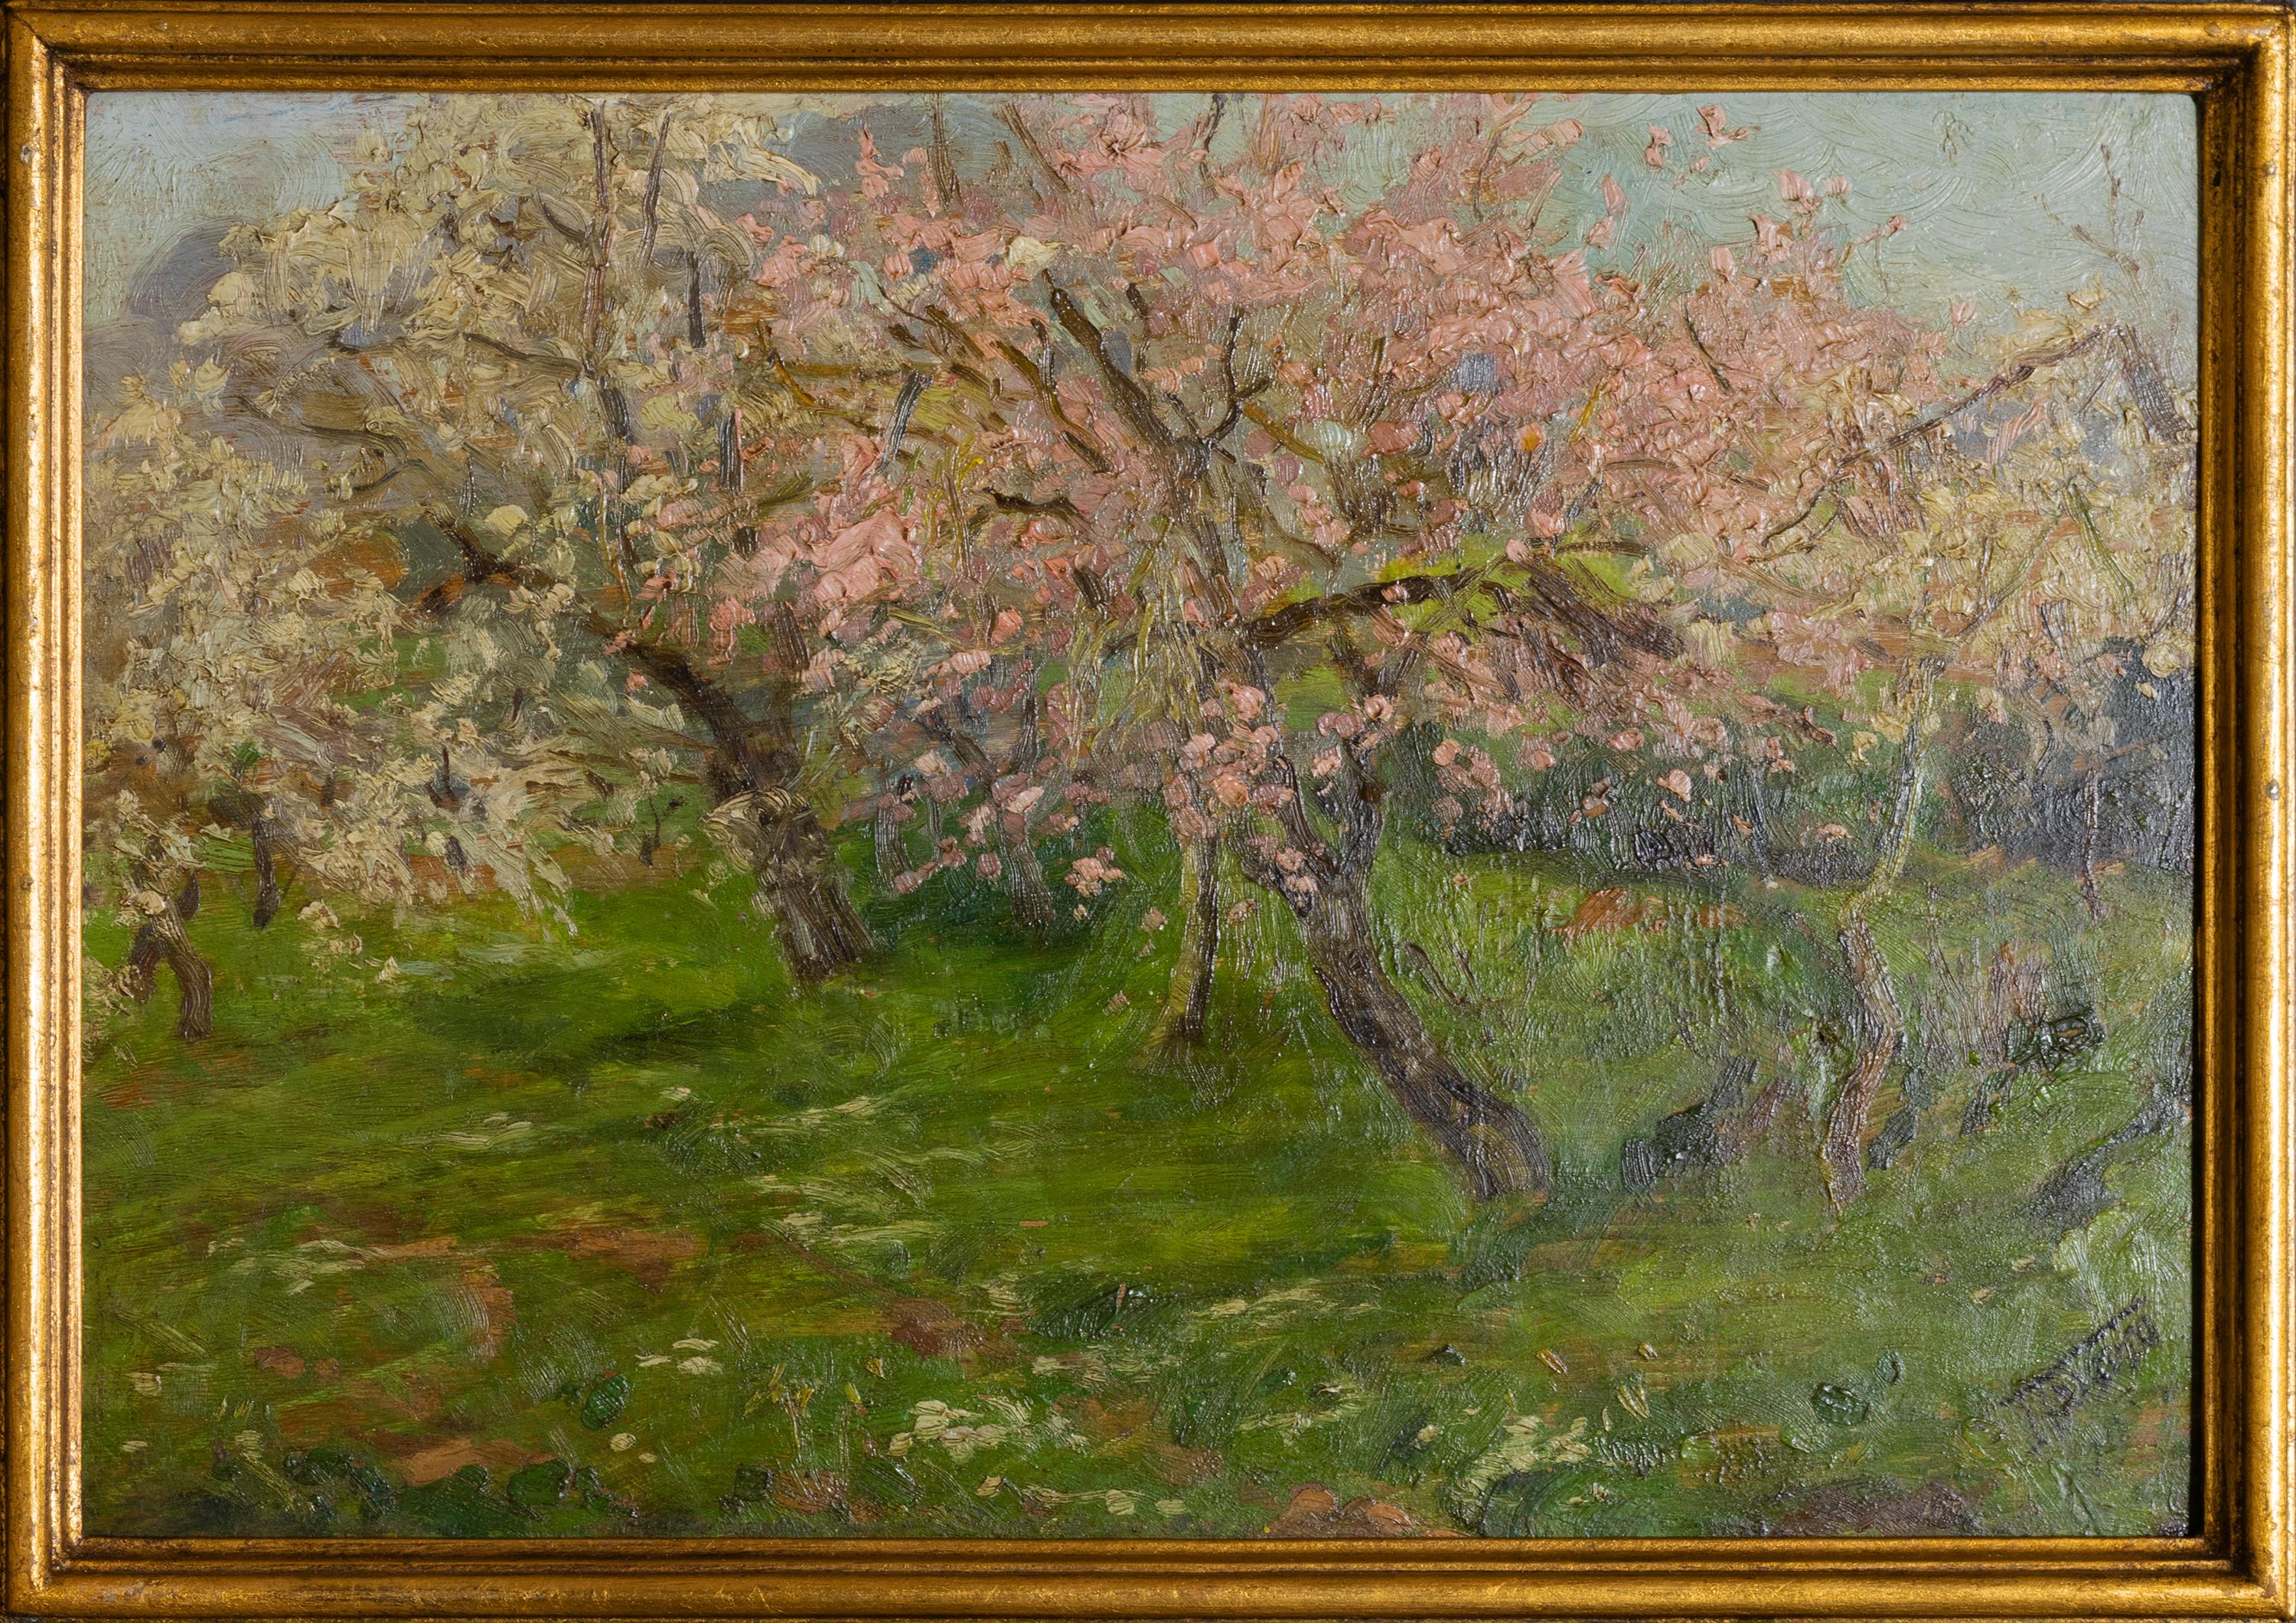 A painting of a nature scene of almond trees in bloom in Spring by the portuguese painter Falcão Trigoso. Delicate almond blossoms, awash in soft pinks and whites, their beauty contrasted by the lush greenery.  A master of Naturalism, Trigoso